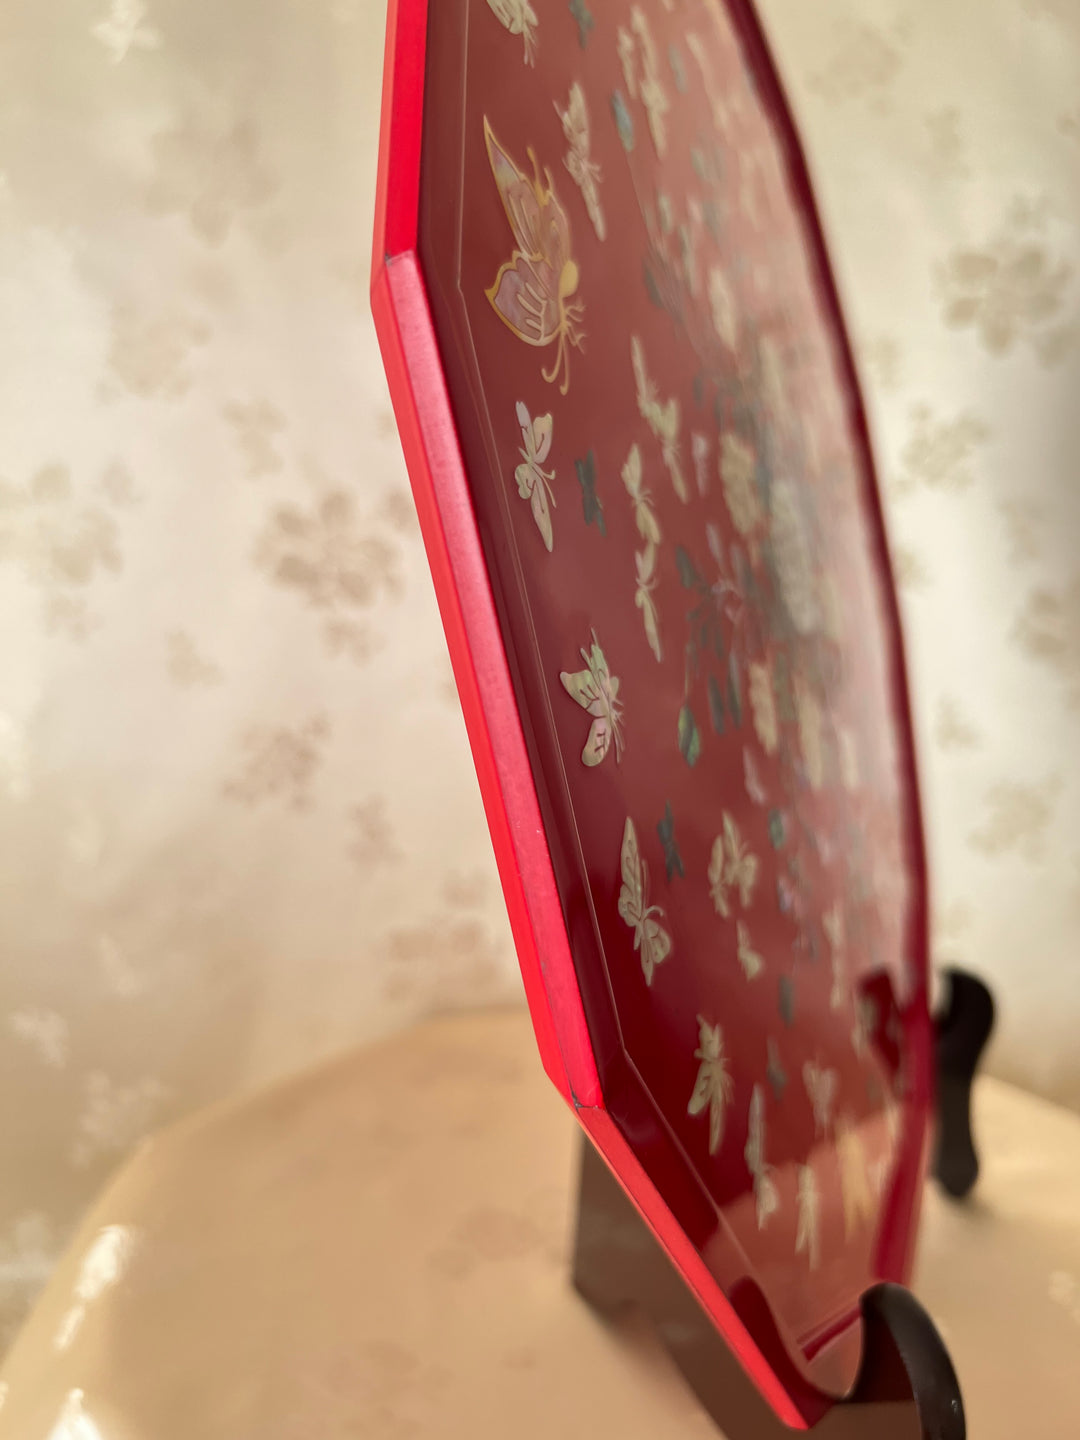 NEW BEAUTIFUL Korean Traditional Mother of Pearl Handmade Red Tray with Flowers and Butterflies Pattern